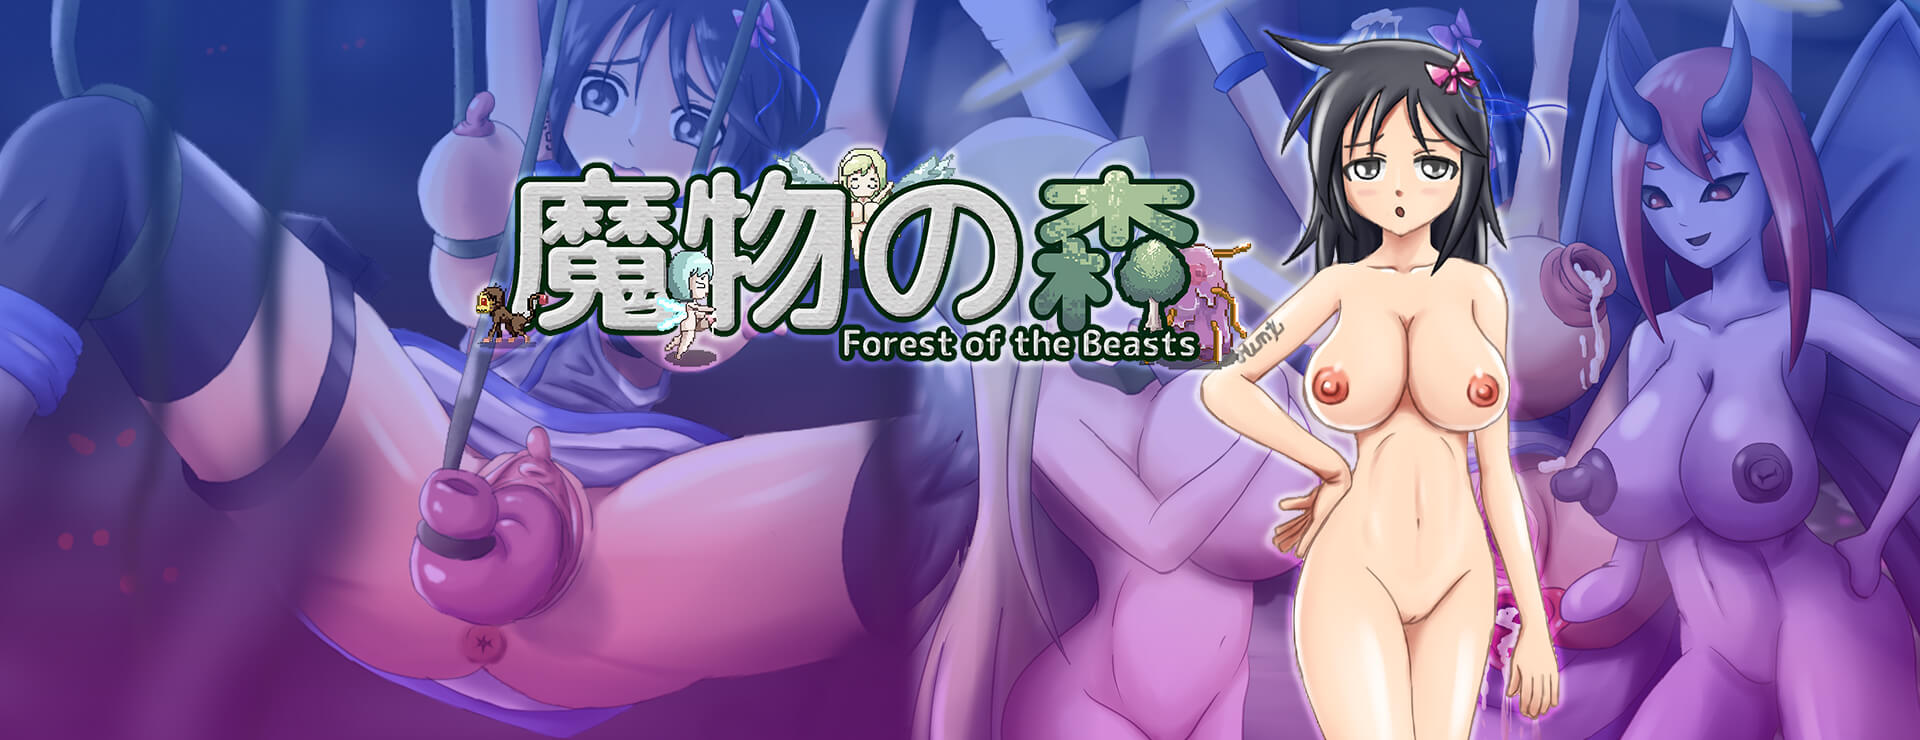 Forest of the Beasts - アクションアドベンチャー ゲーム